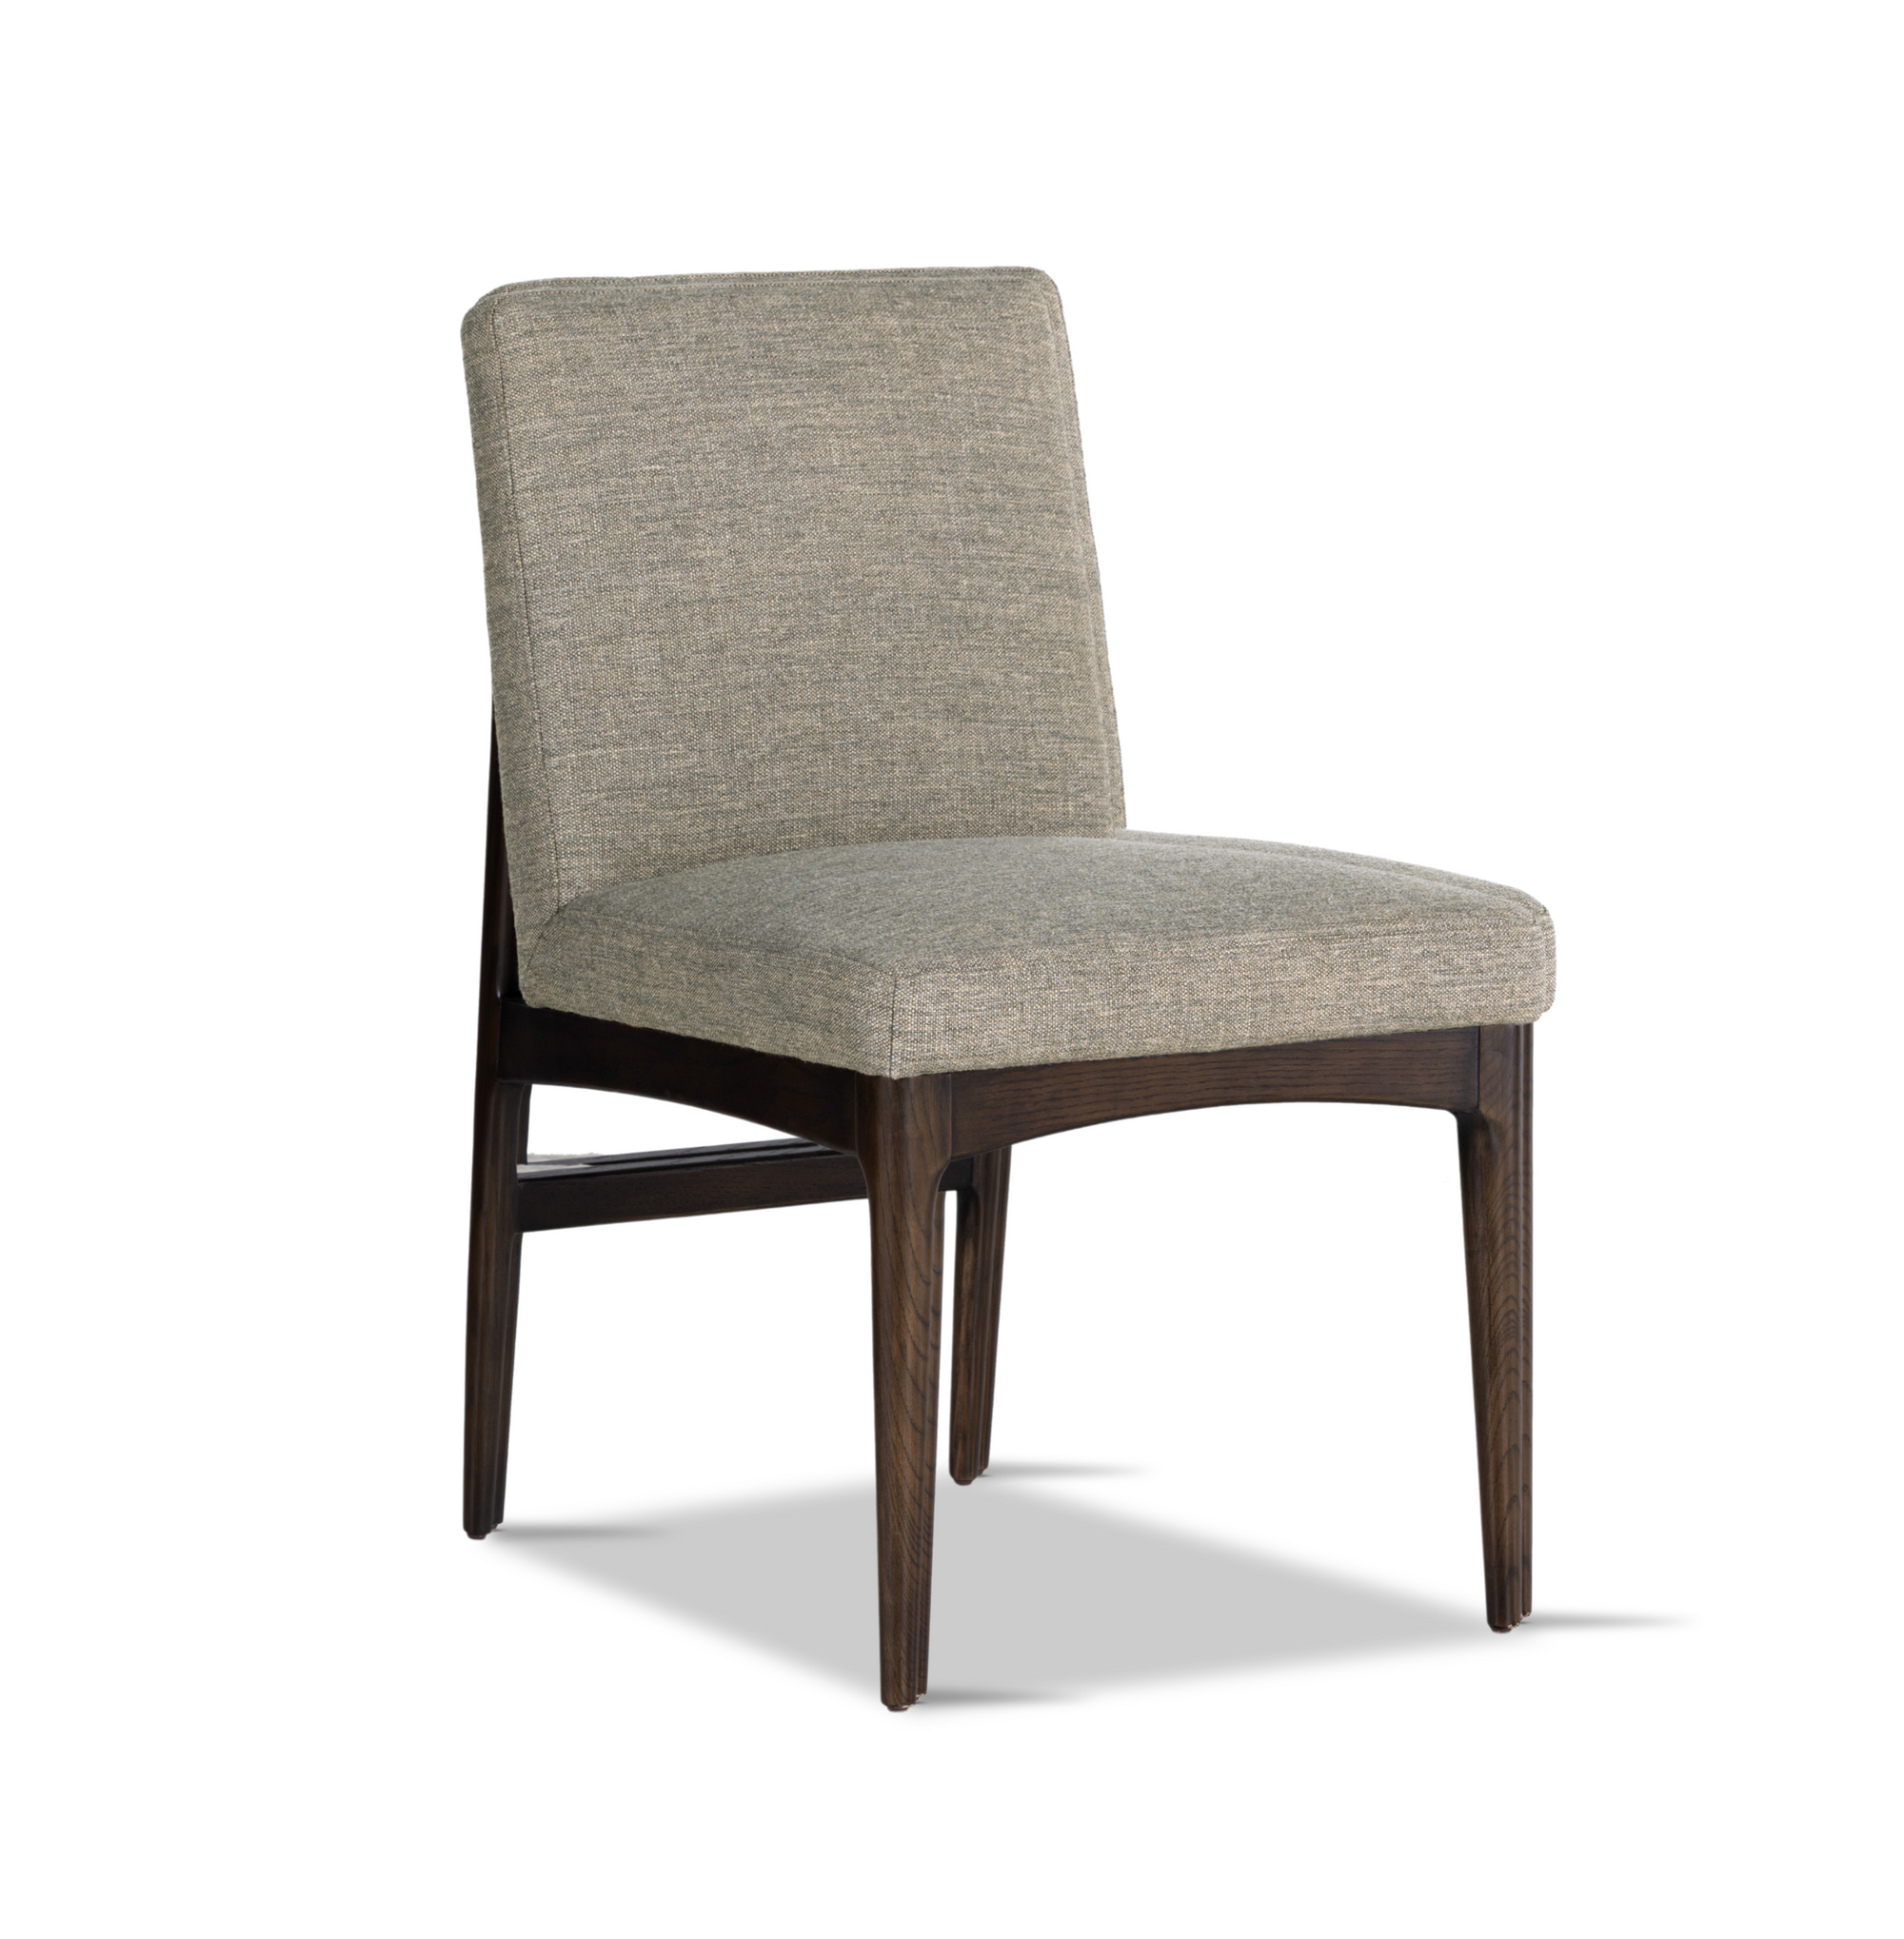 Abba Dining Chair - Rug & Weave